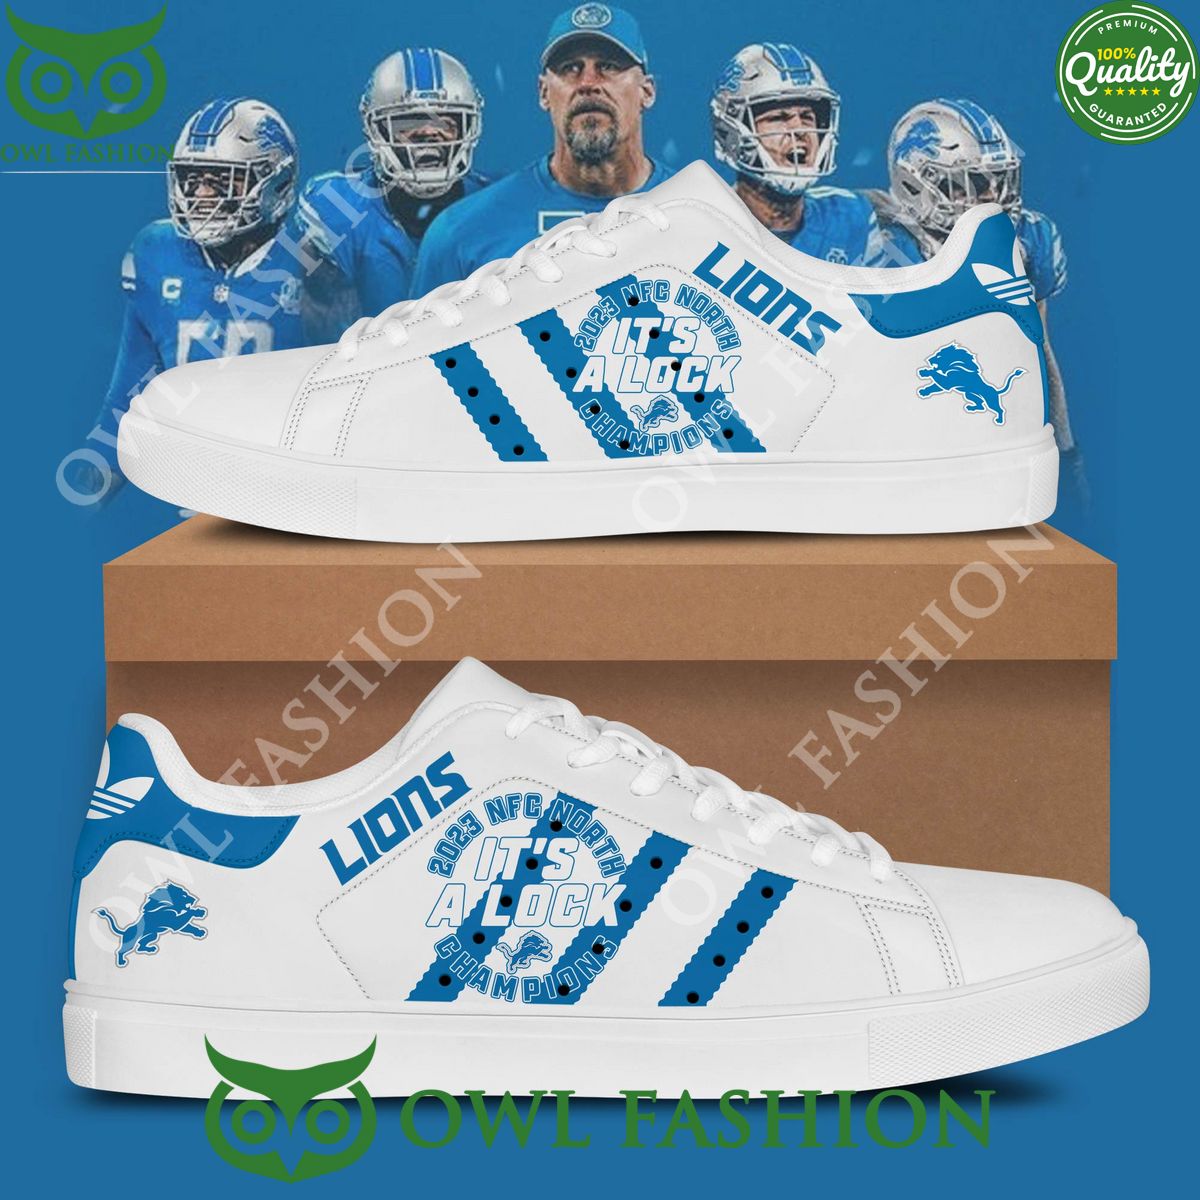 2023 NFC North Its a lock Champions Detroit Lions Stan smith shoes